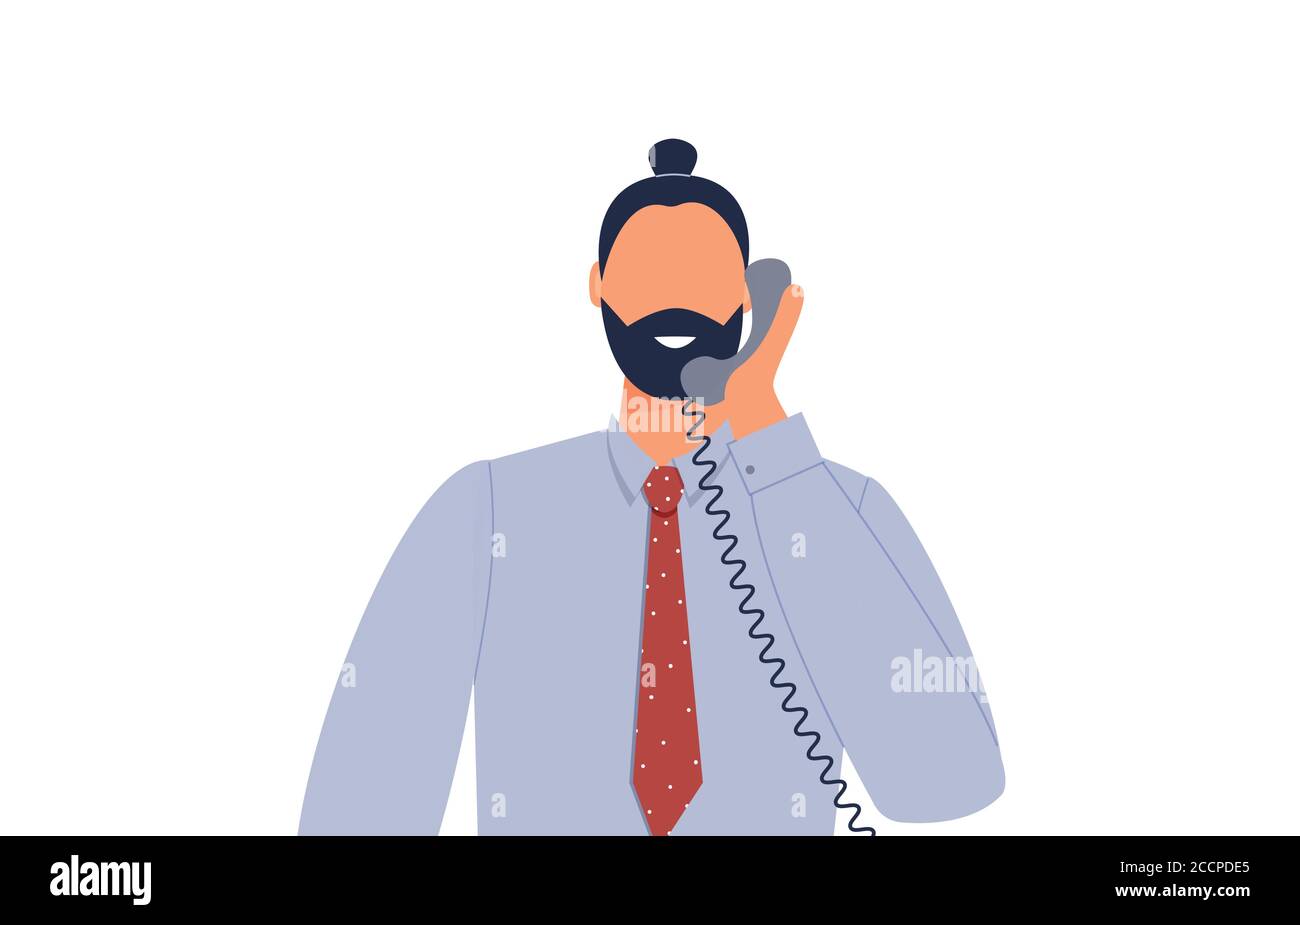 Online support consultant answering questions from consumers by telephone.Hipster young man holding landline phone.Businessman Stock Vector